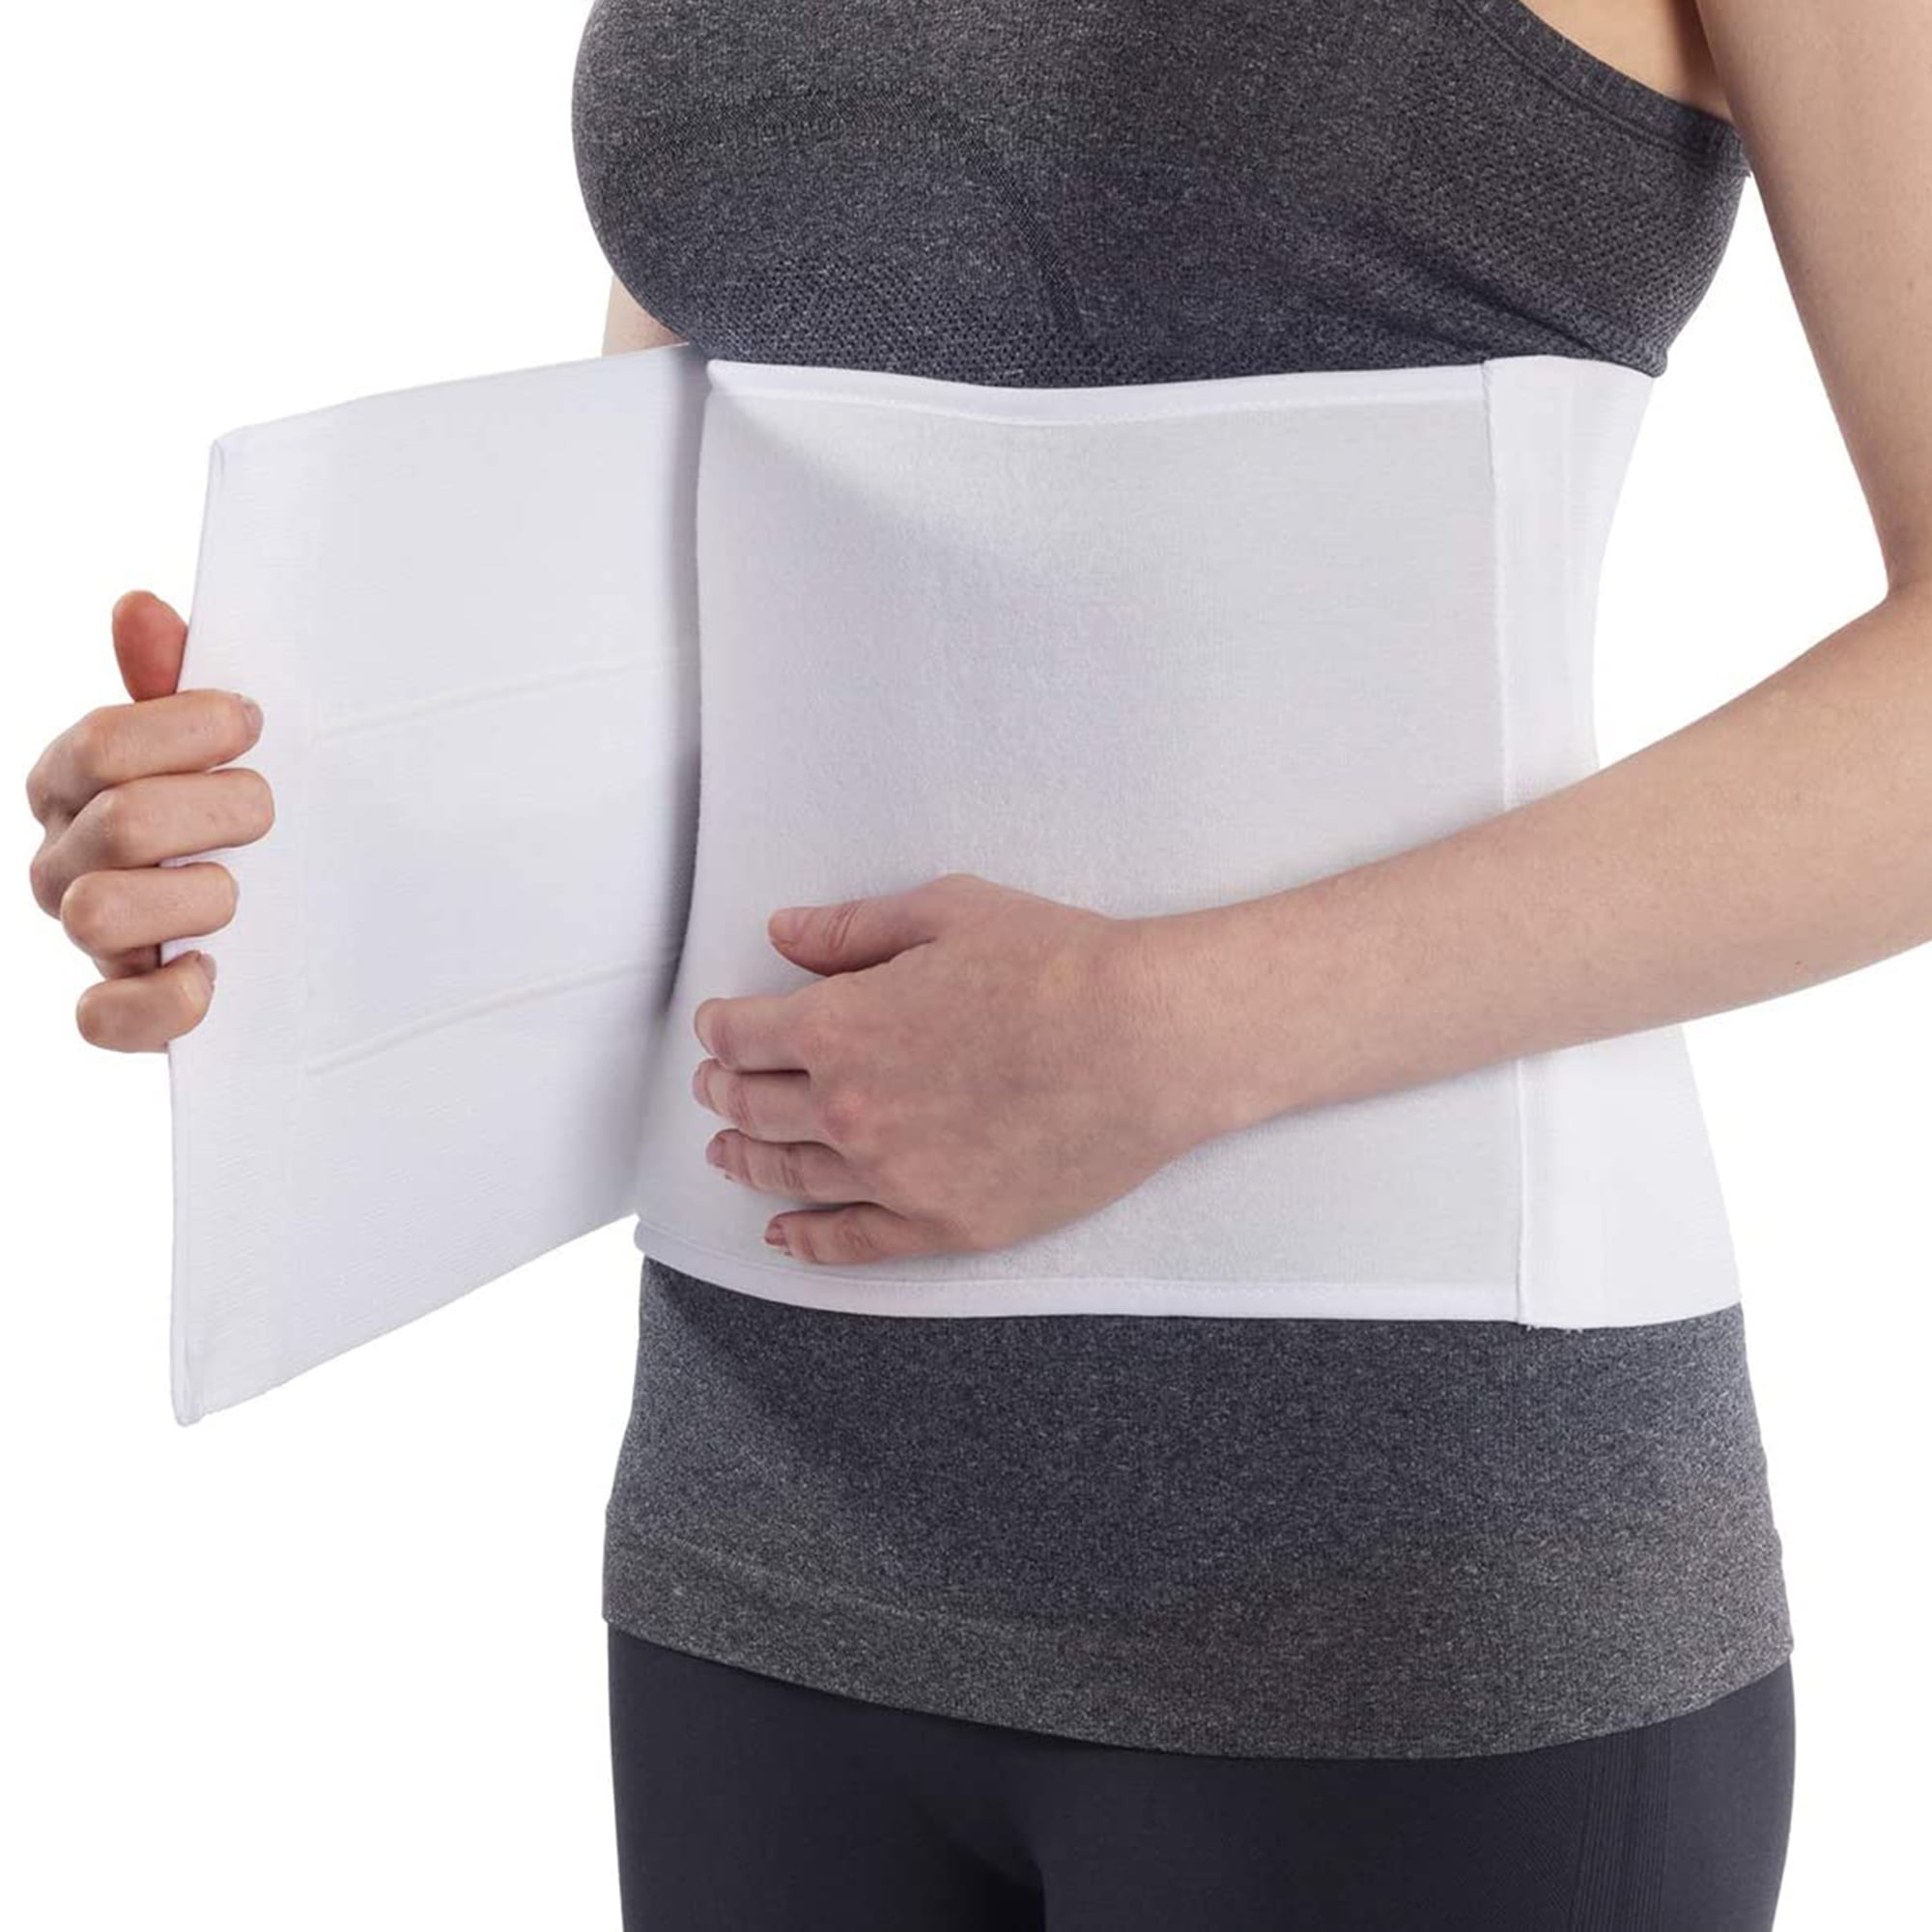 Caromed Inc. - This girdle/binder combo provides maximum support and  compression to the abdomen and lower body. Ideal following Abdominoplasty,  liposuction of abdomen, hips and the lower body. Offered in black and